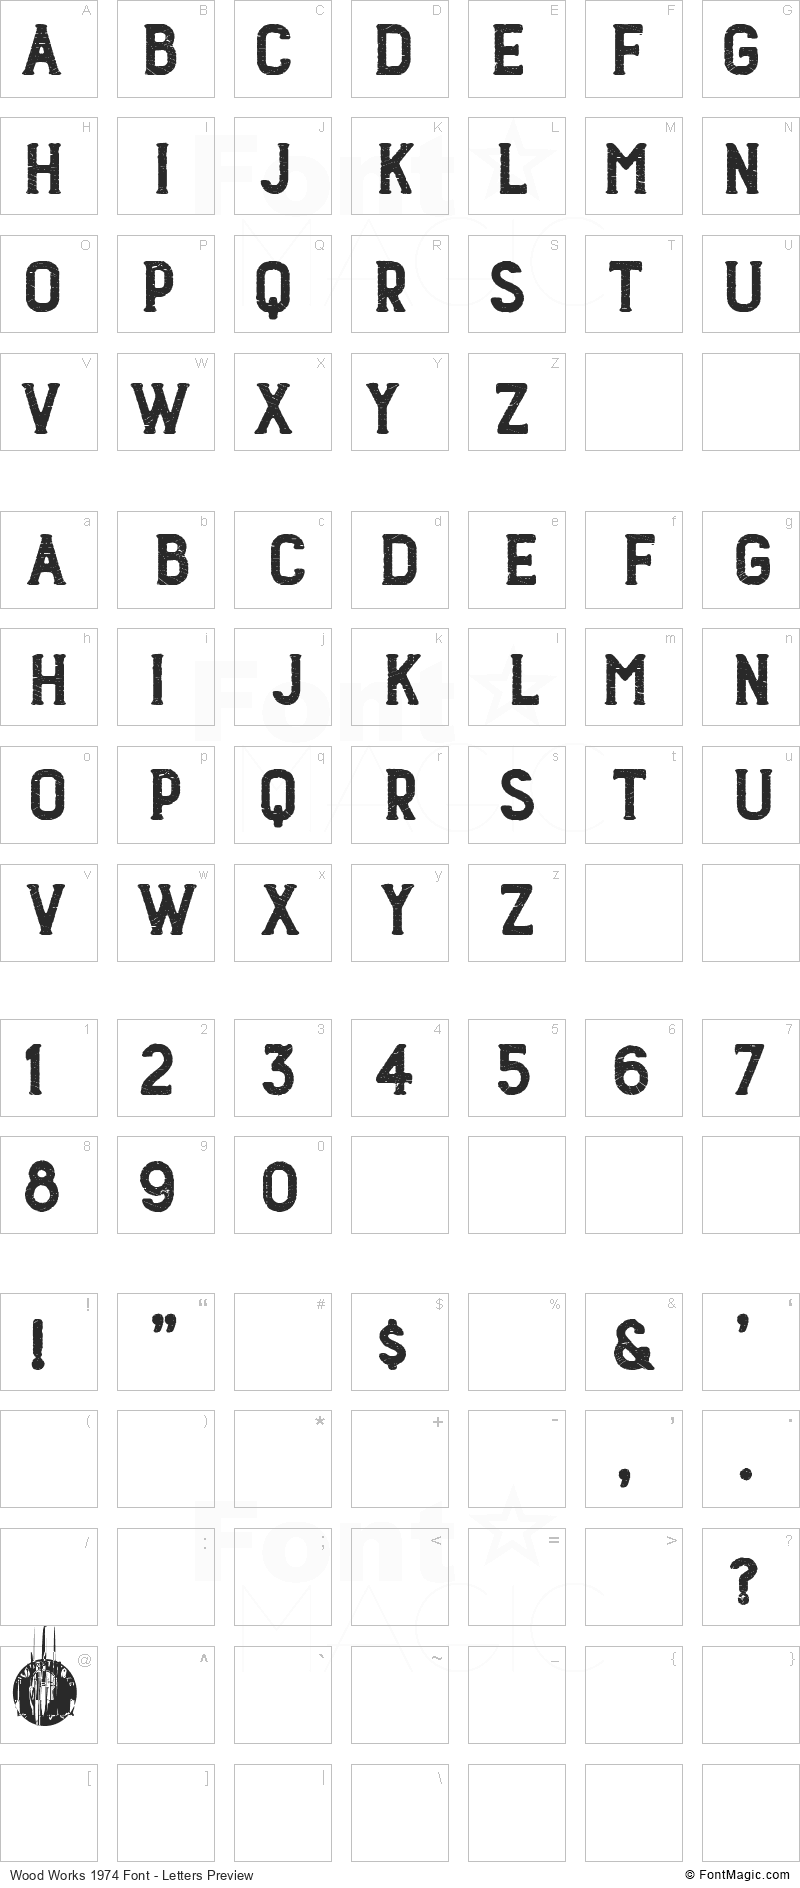 Wood Works 1974 Font - All Latters Preview Chart